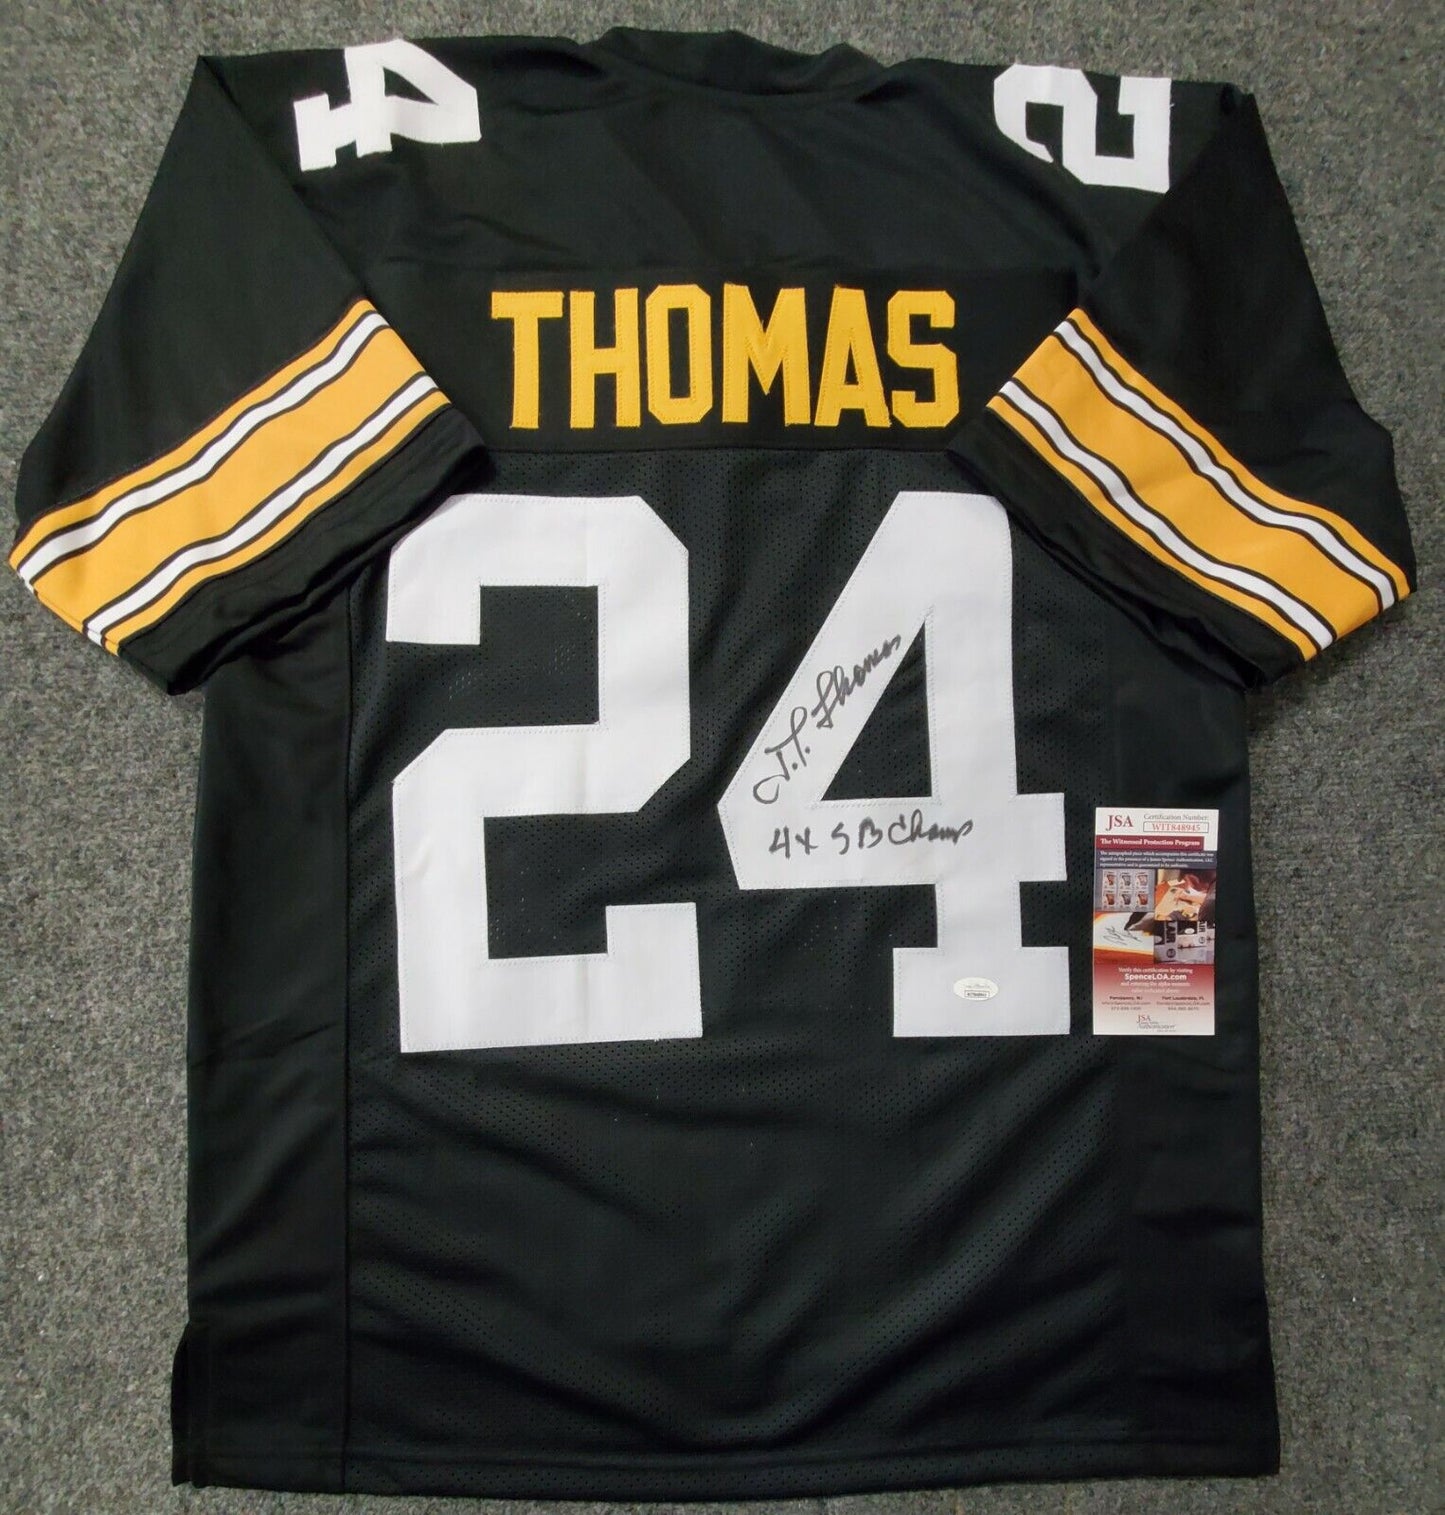 MVP Authentics Pittsburgh Steelers Jt Thomas Autographed Inscribed Jersey Jsa Coa 112.50 sports jersey framing , jersey framing